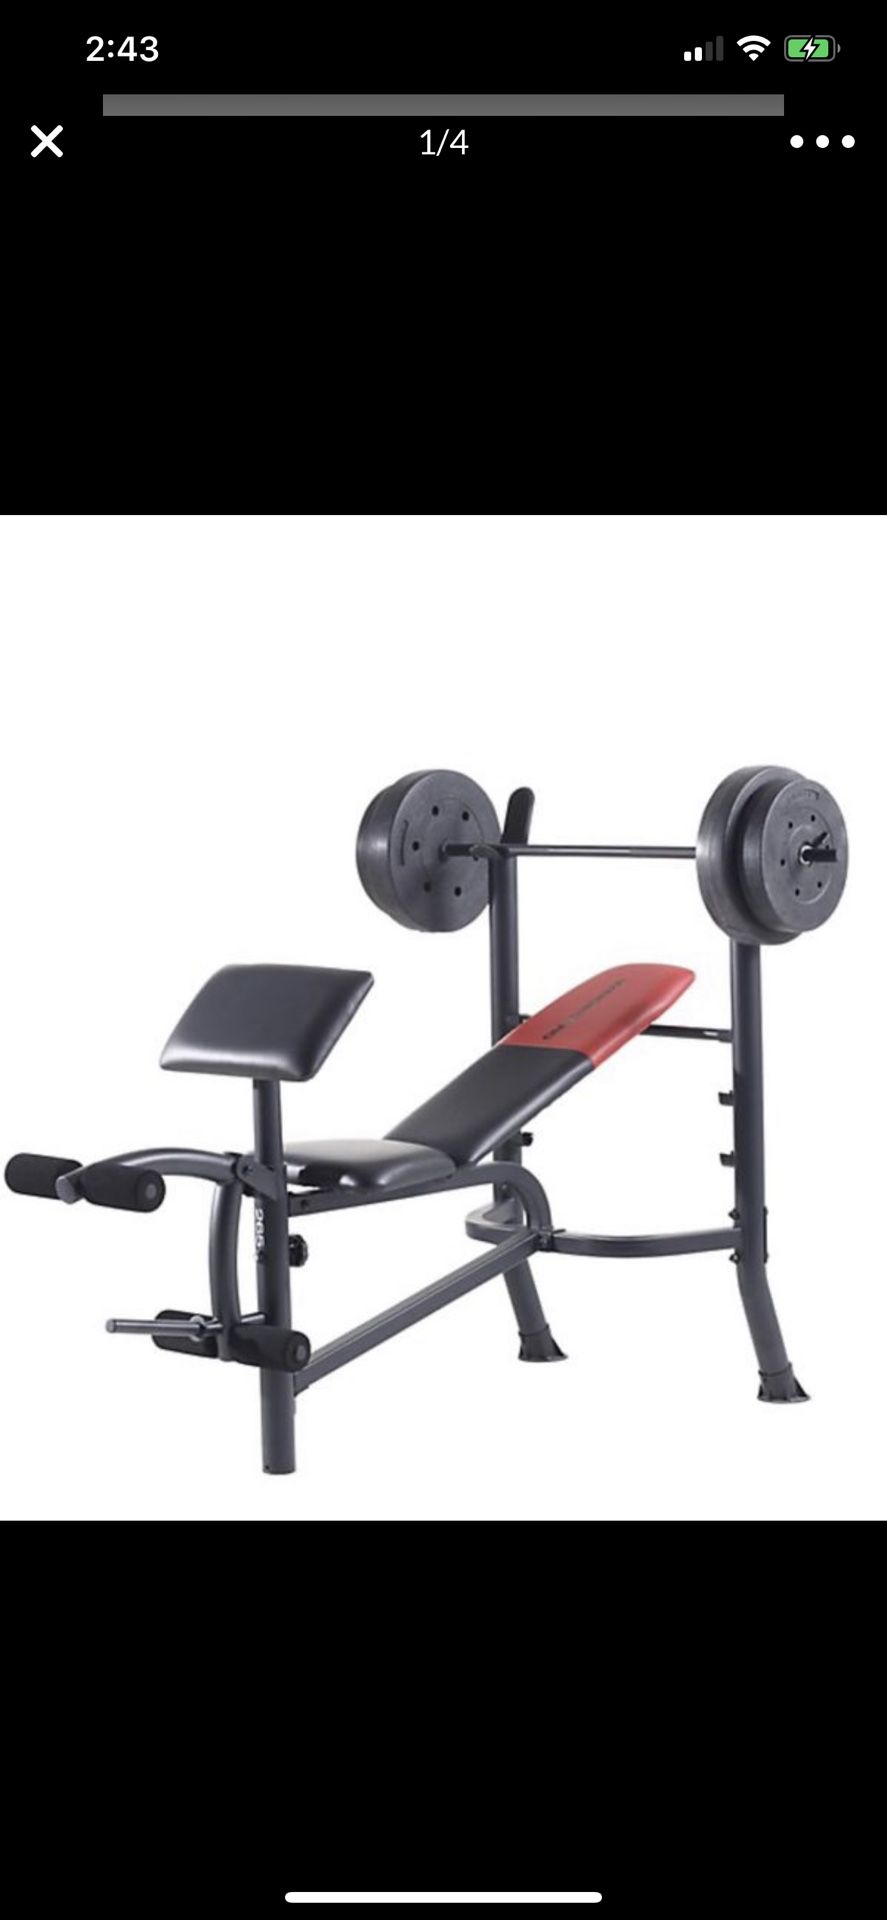 New in box Weider Pro 265 Standard Bench, Bar, and WeightSet